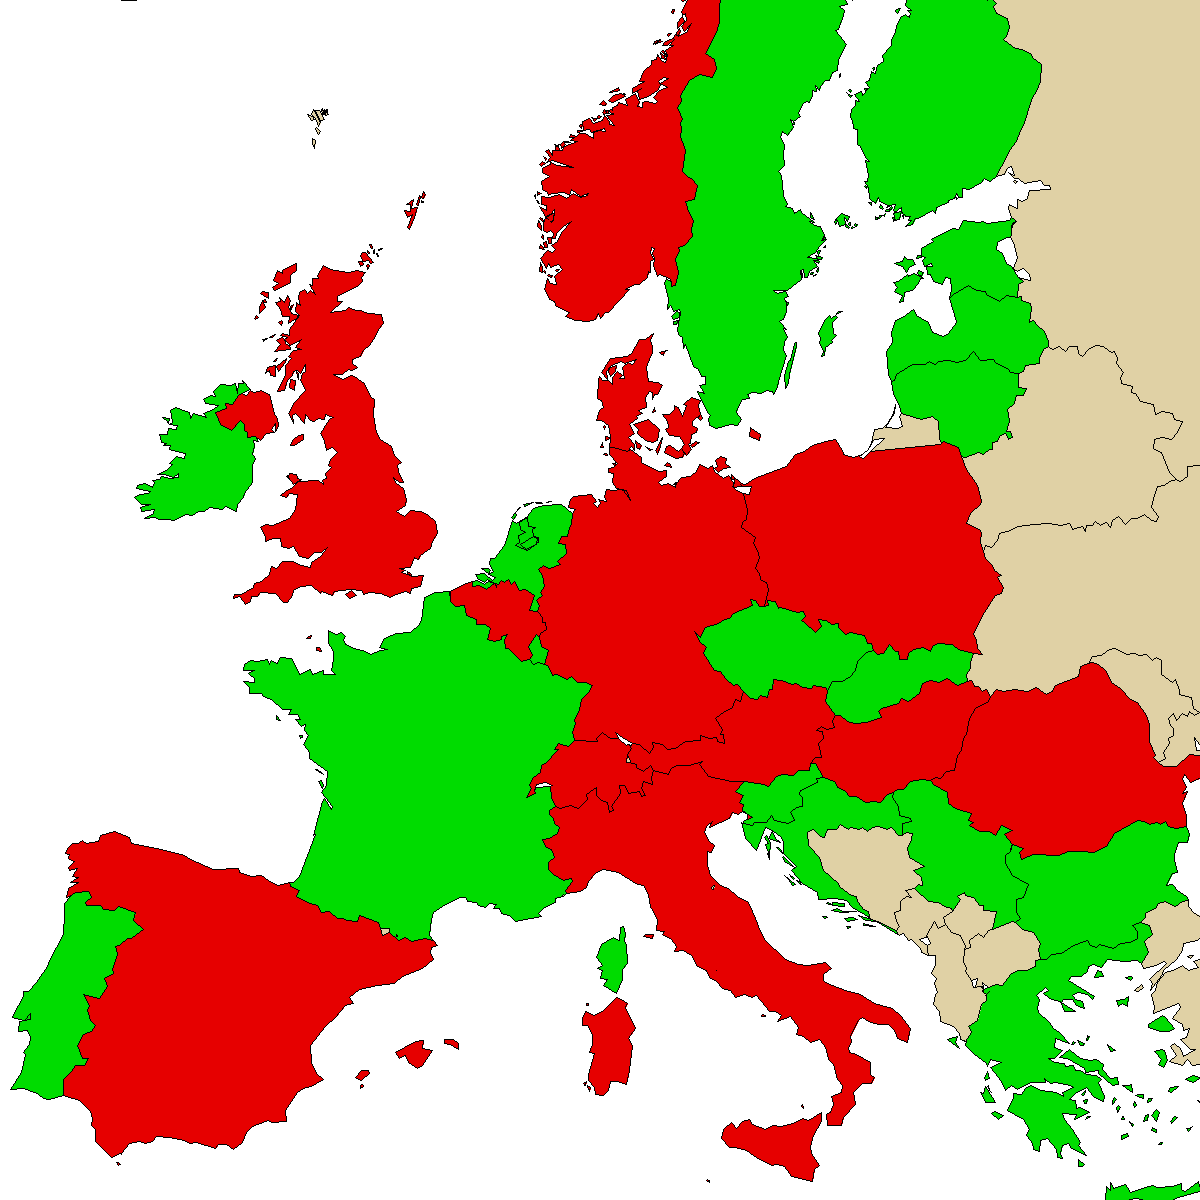 legal info map for our product Euthylone, green are countries with no ban, red with ban, grey is unknown